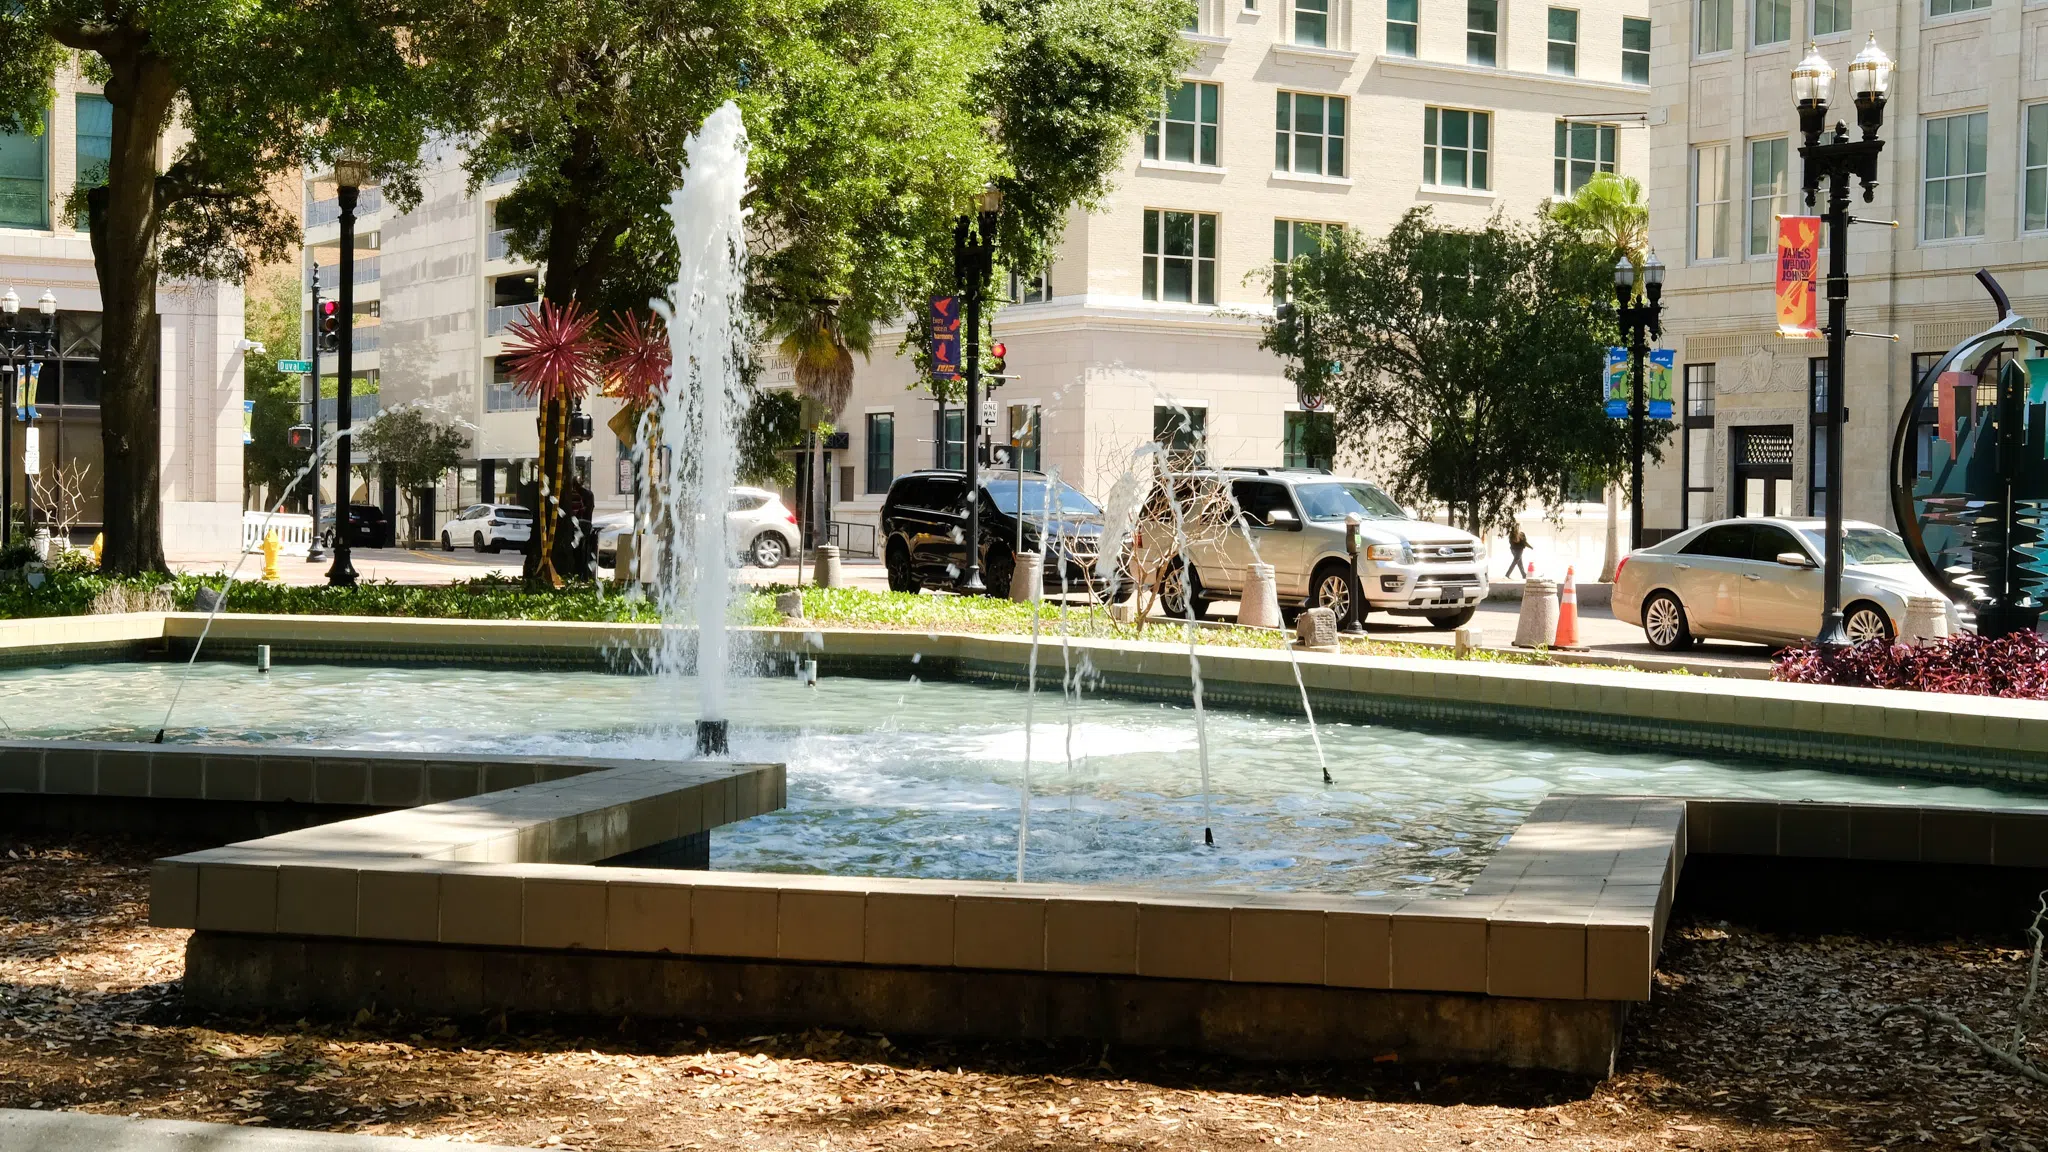 A large fountain situated in the middle of the park.